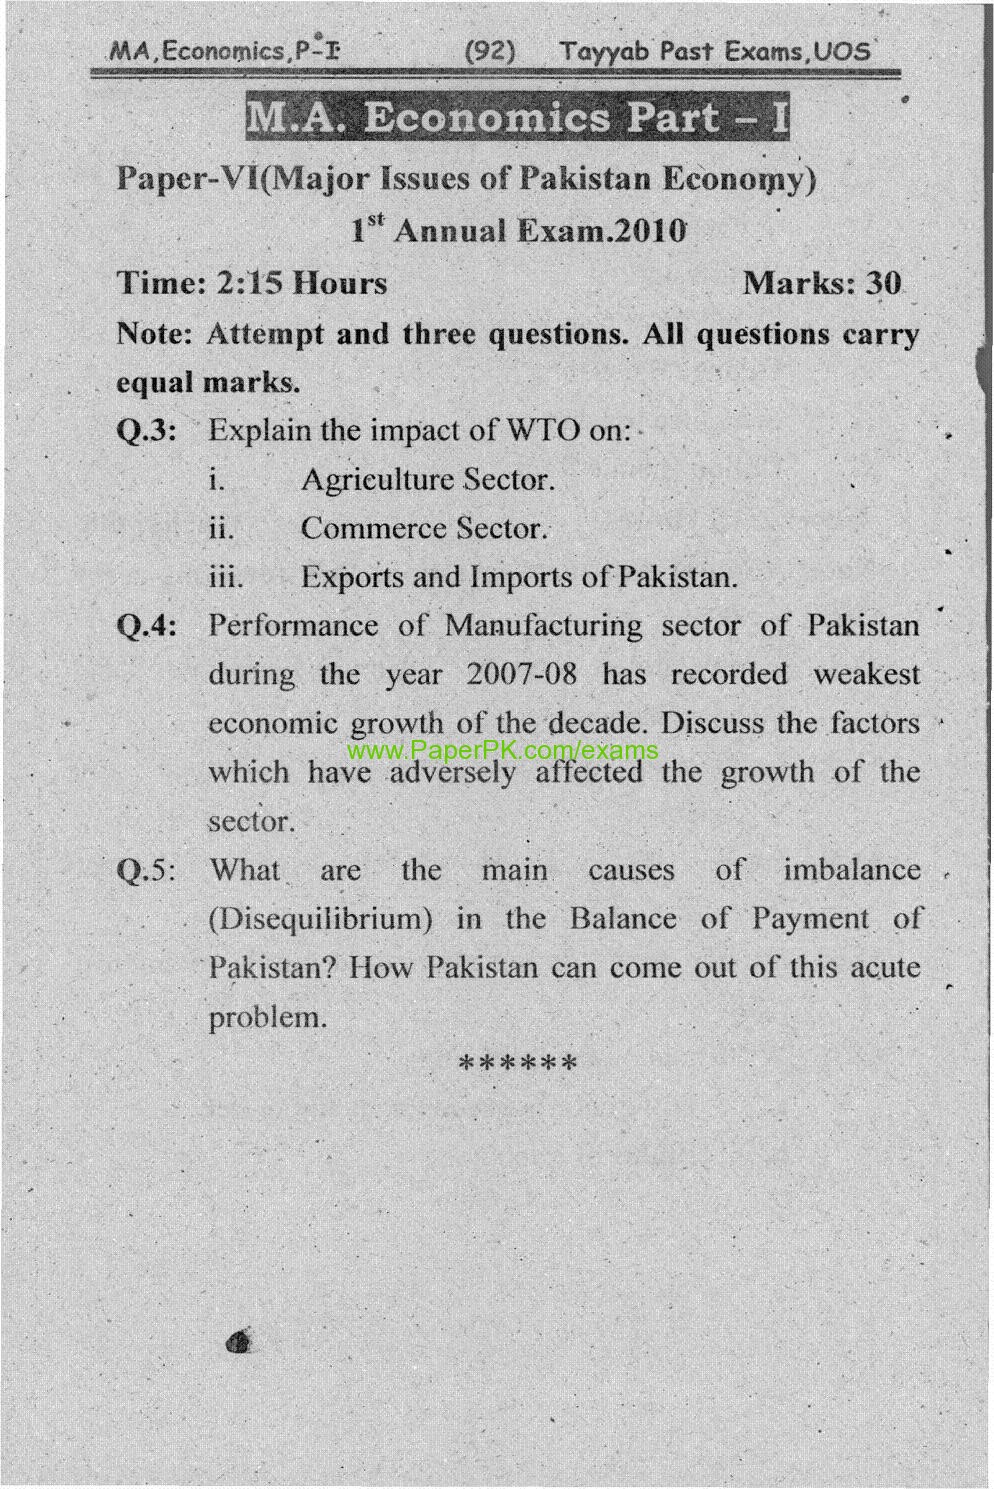 research papers of economics in pakistan